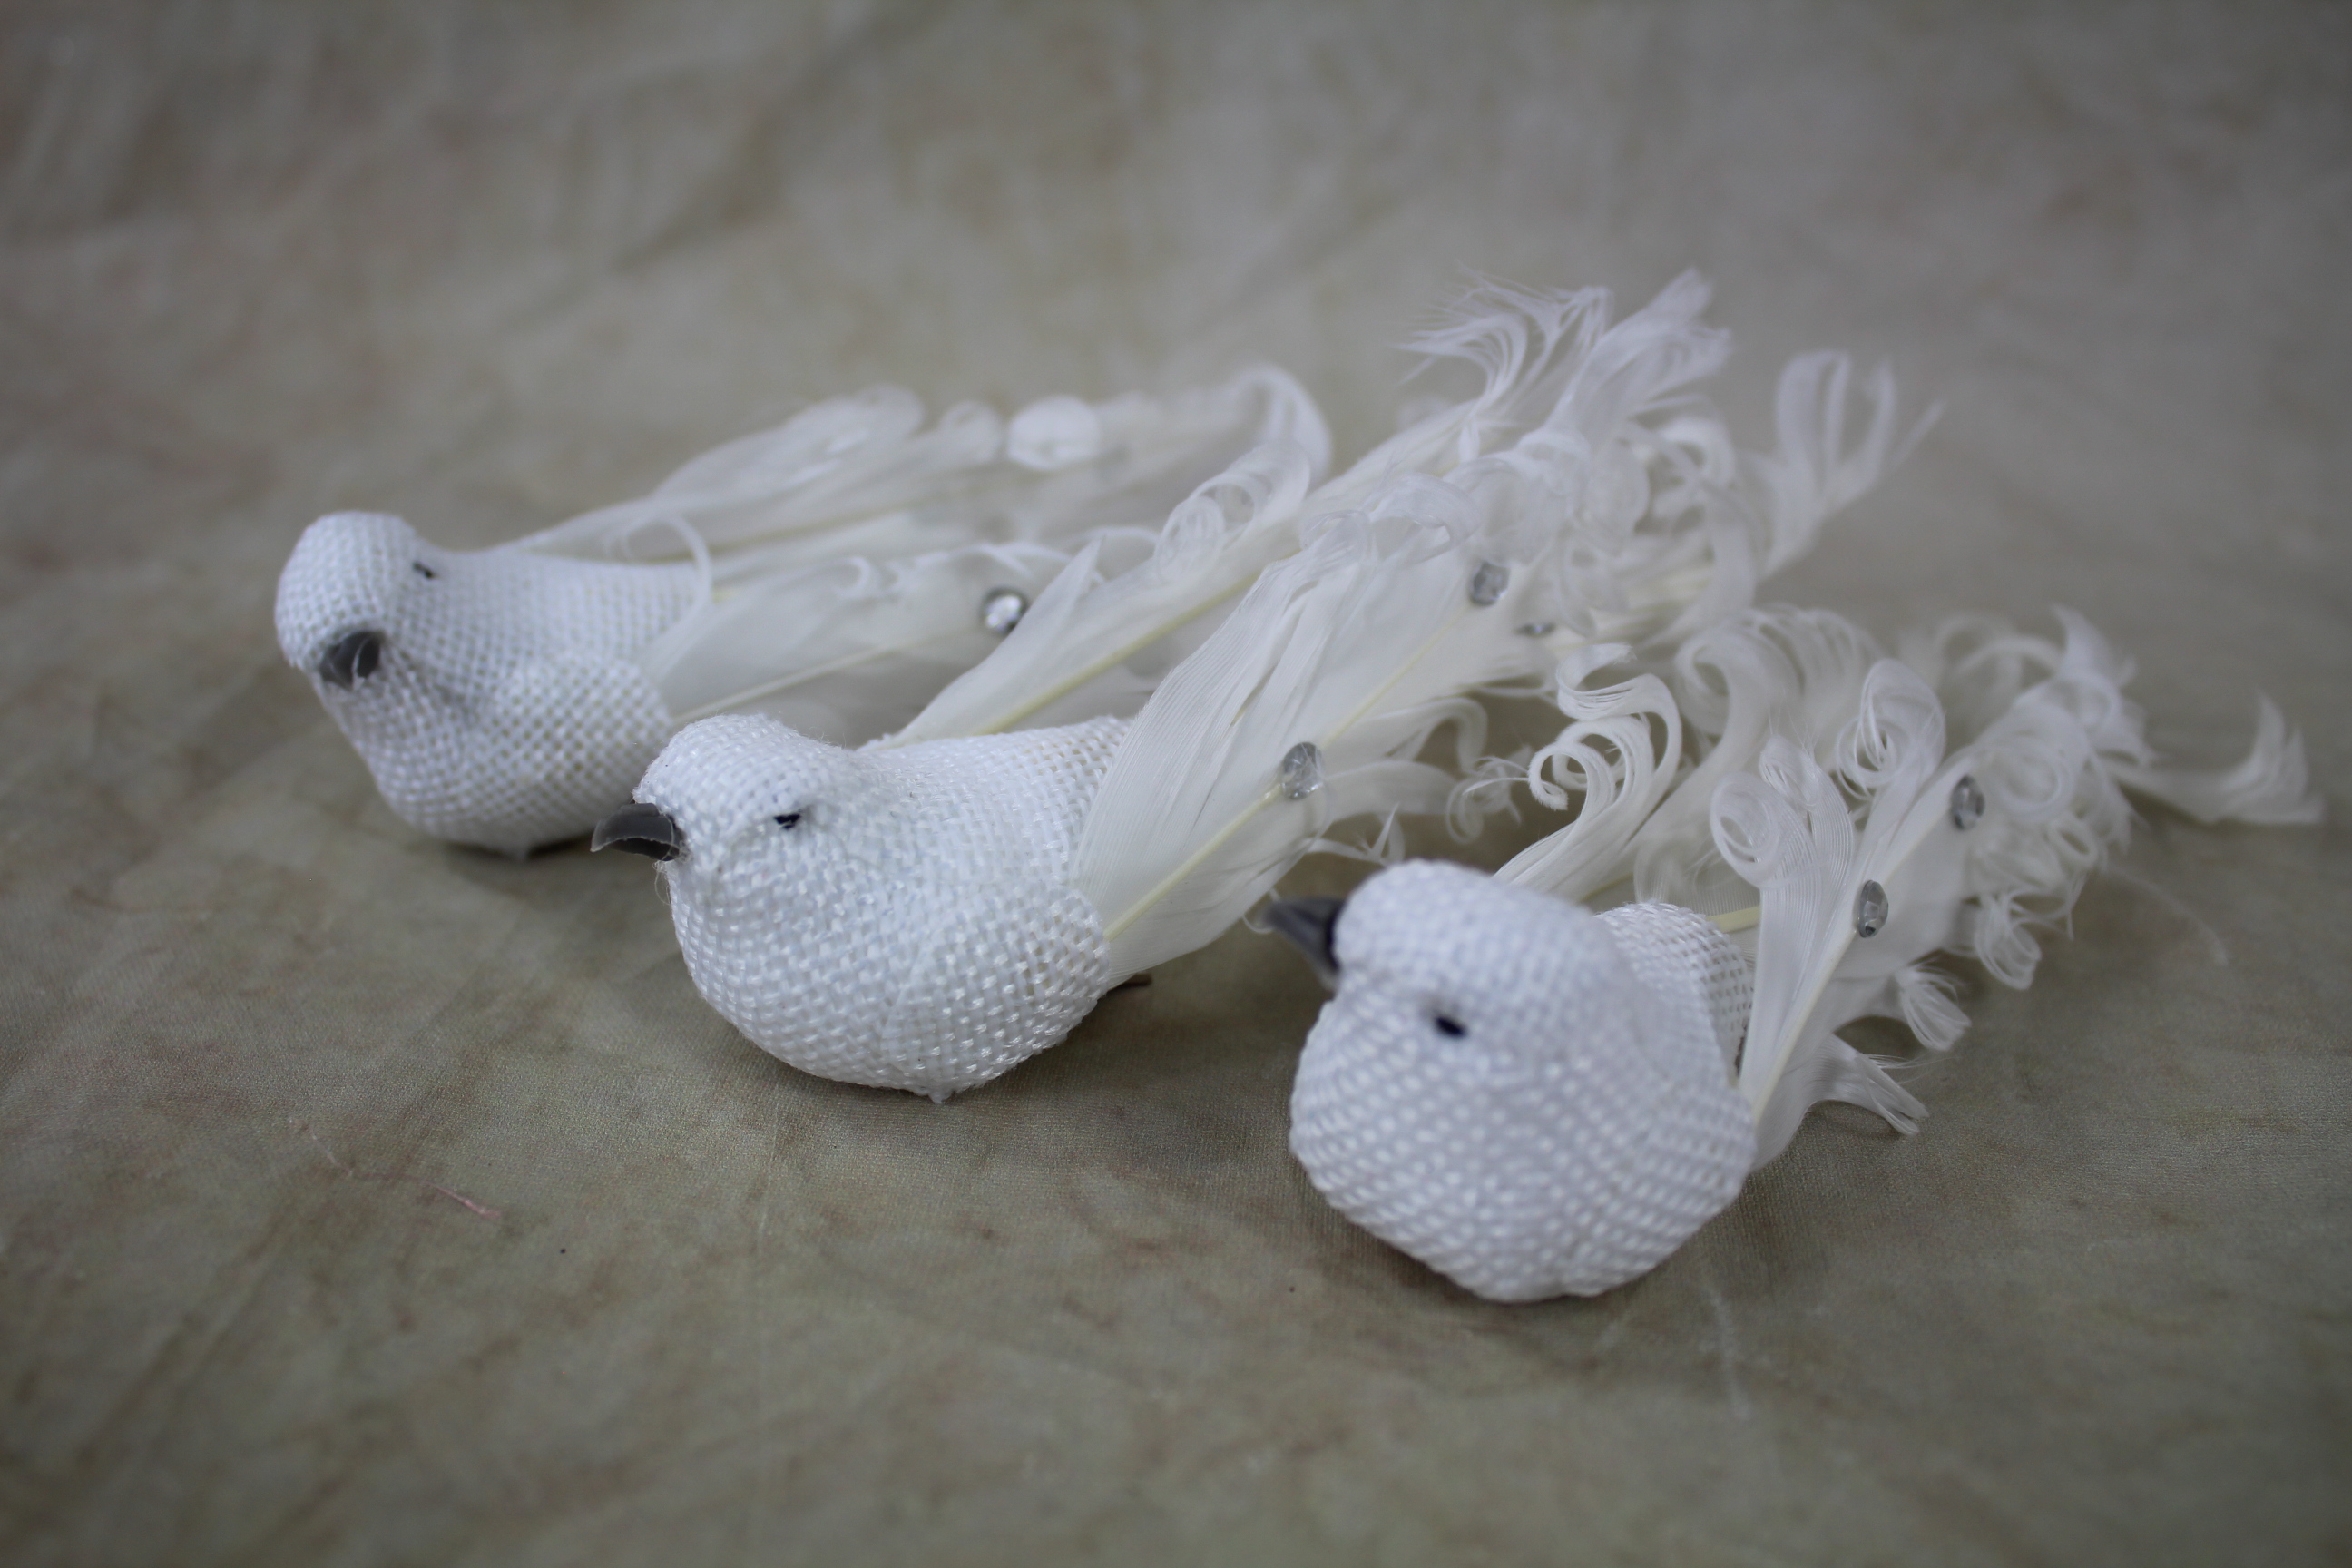 3 x 14cm hessian feather tail birds on clips